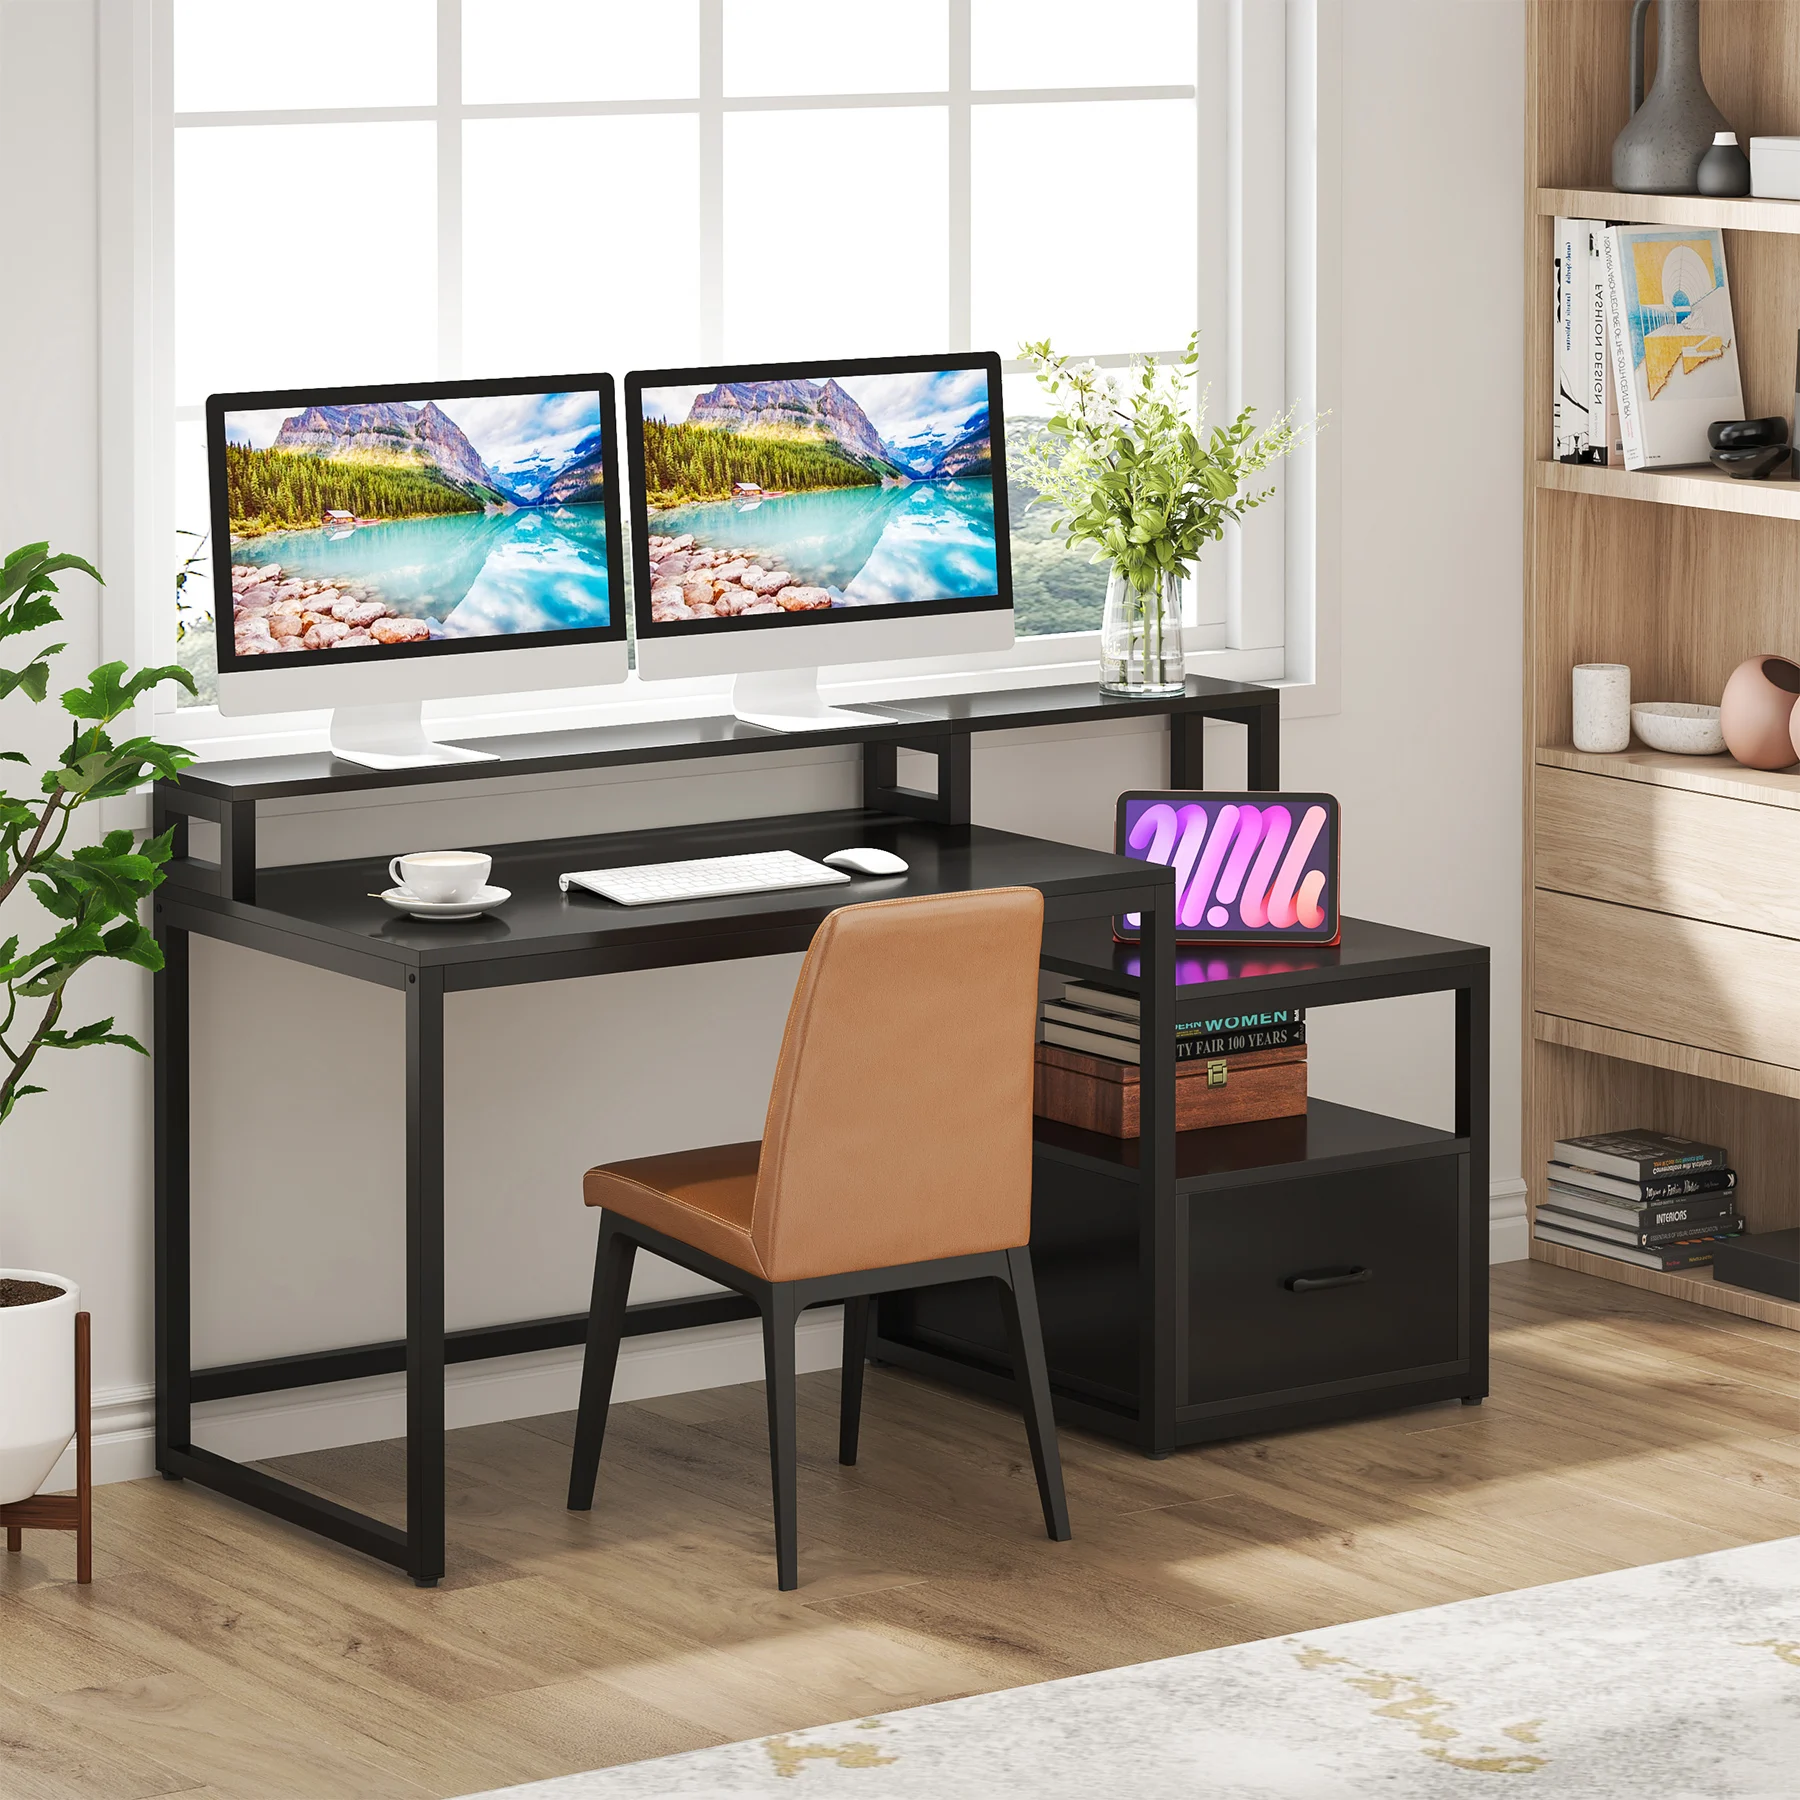 Modern Style Writing Desk Laptop Table Office Computer Desk With File Drawer